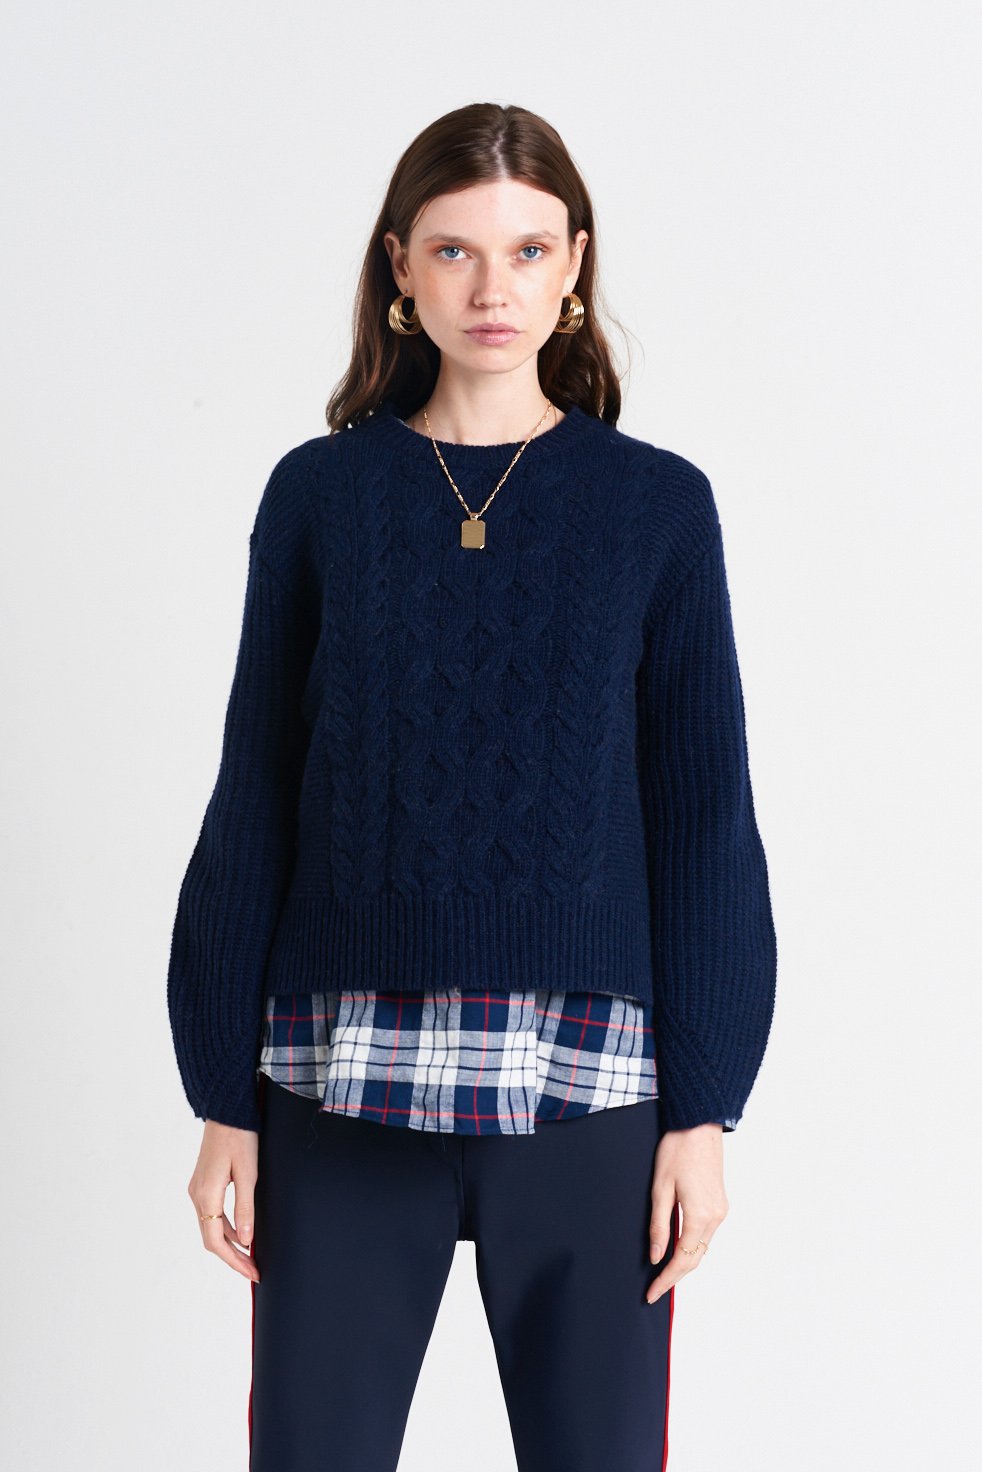 HEY SUNSHINE NAVY CABLE KNIT - Mary & Me